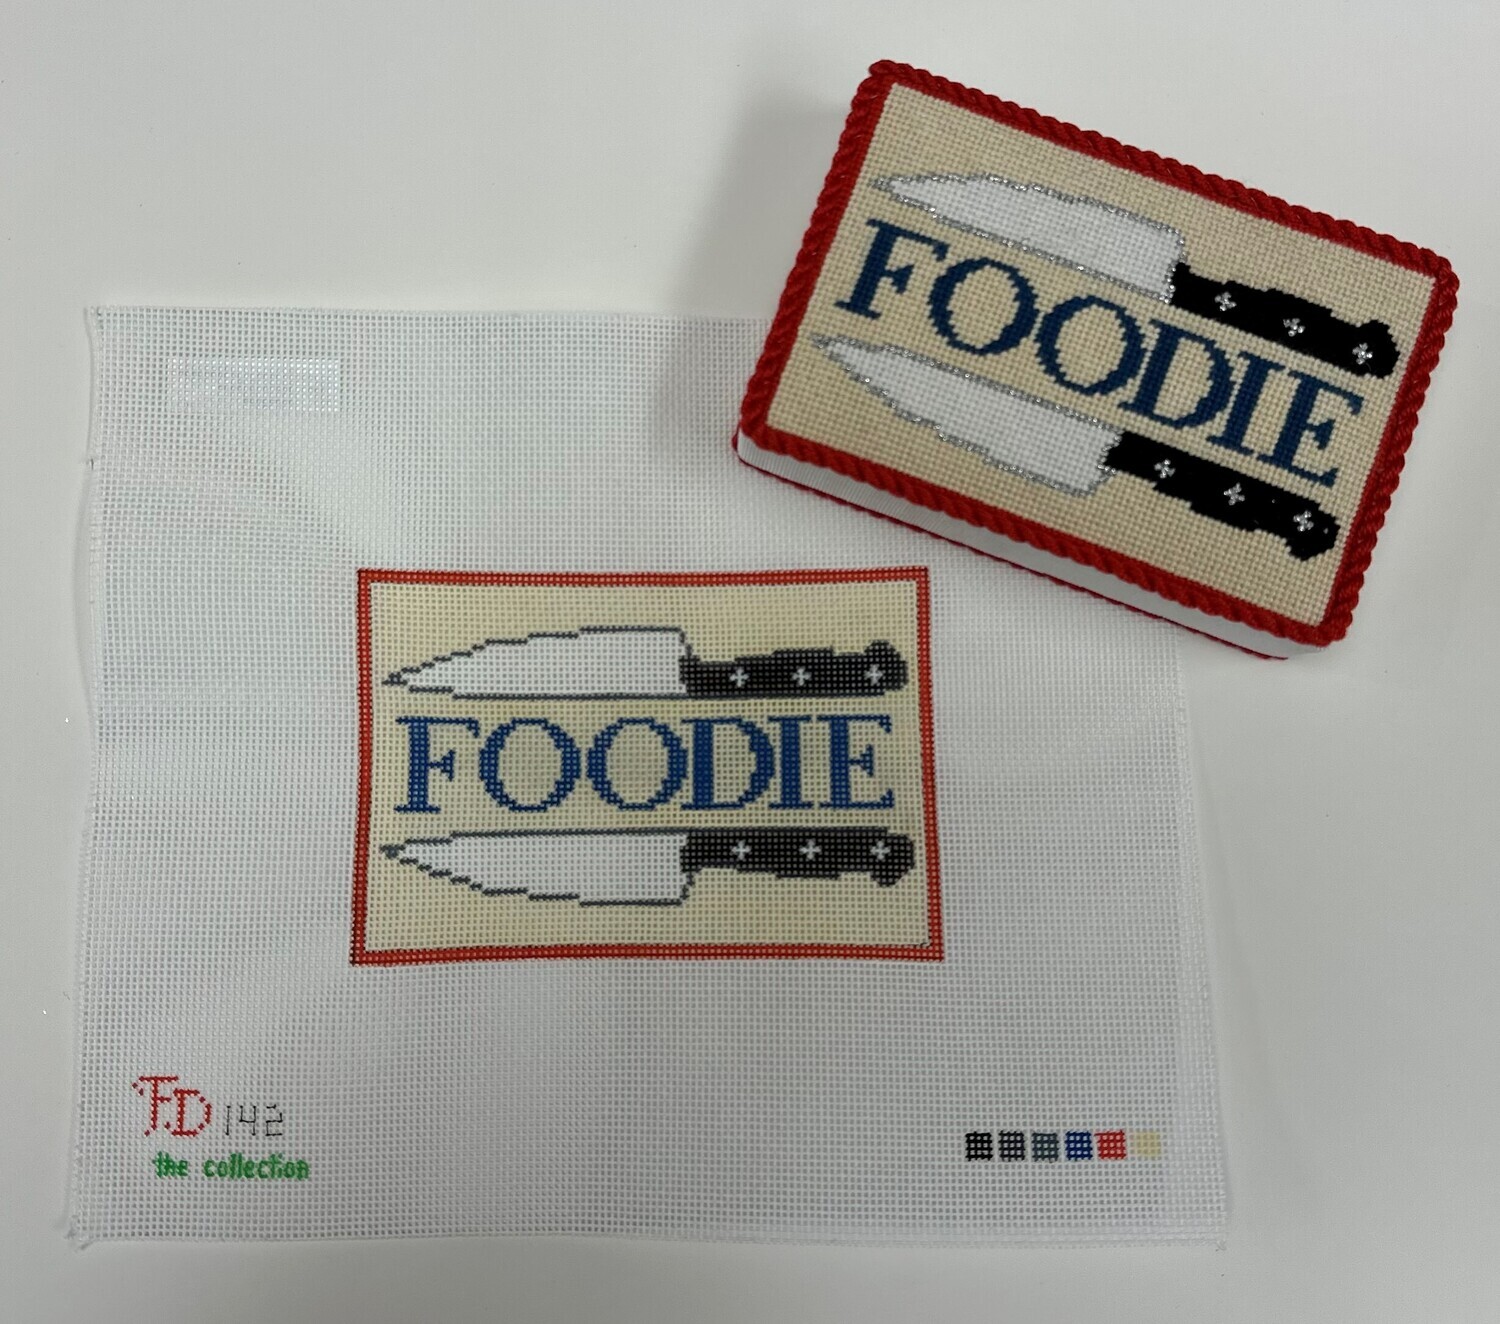 The Foodie (Handpainted by the Collection)